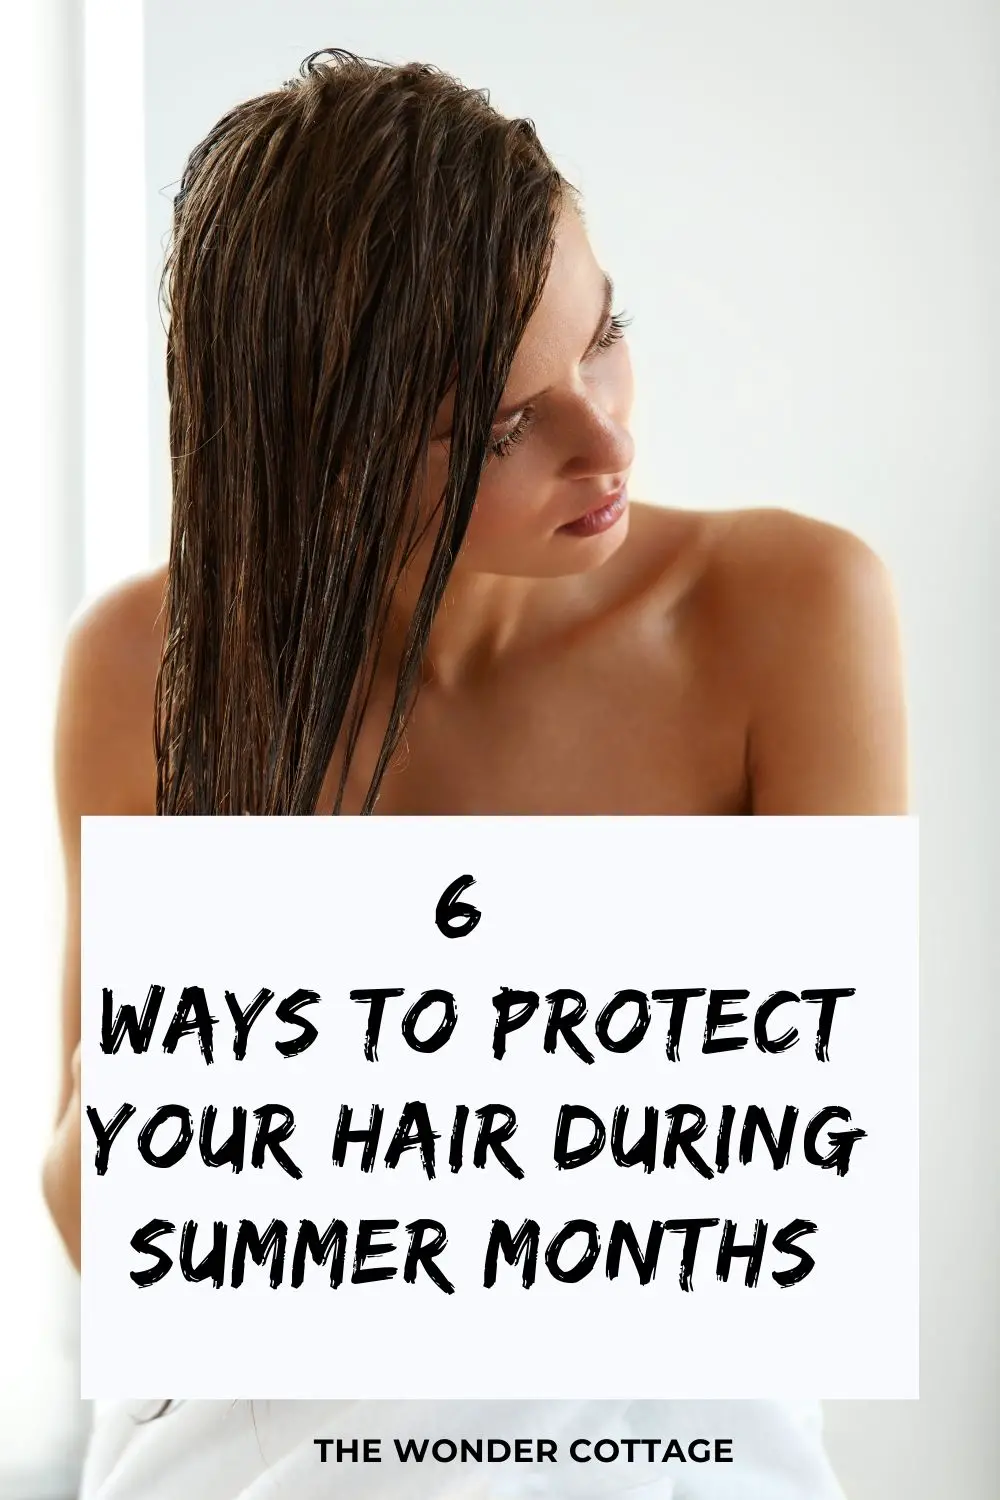 6 ways to protect your hair during summer